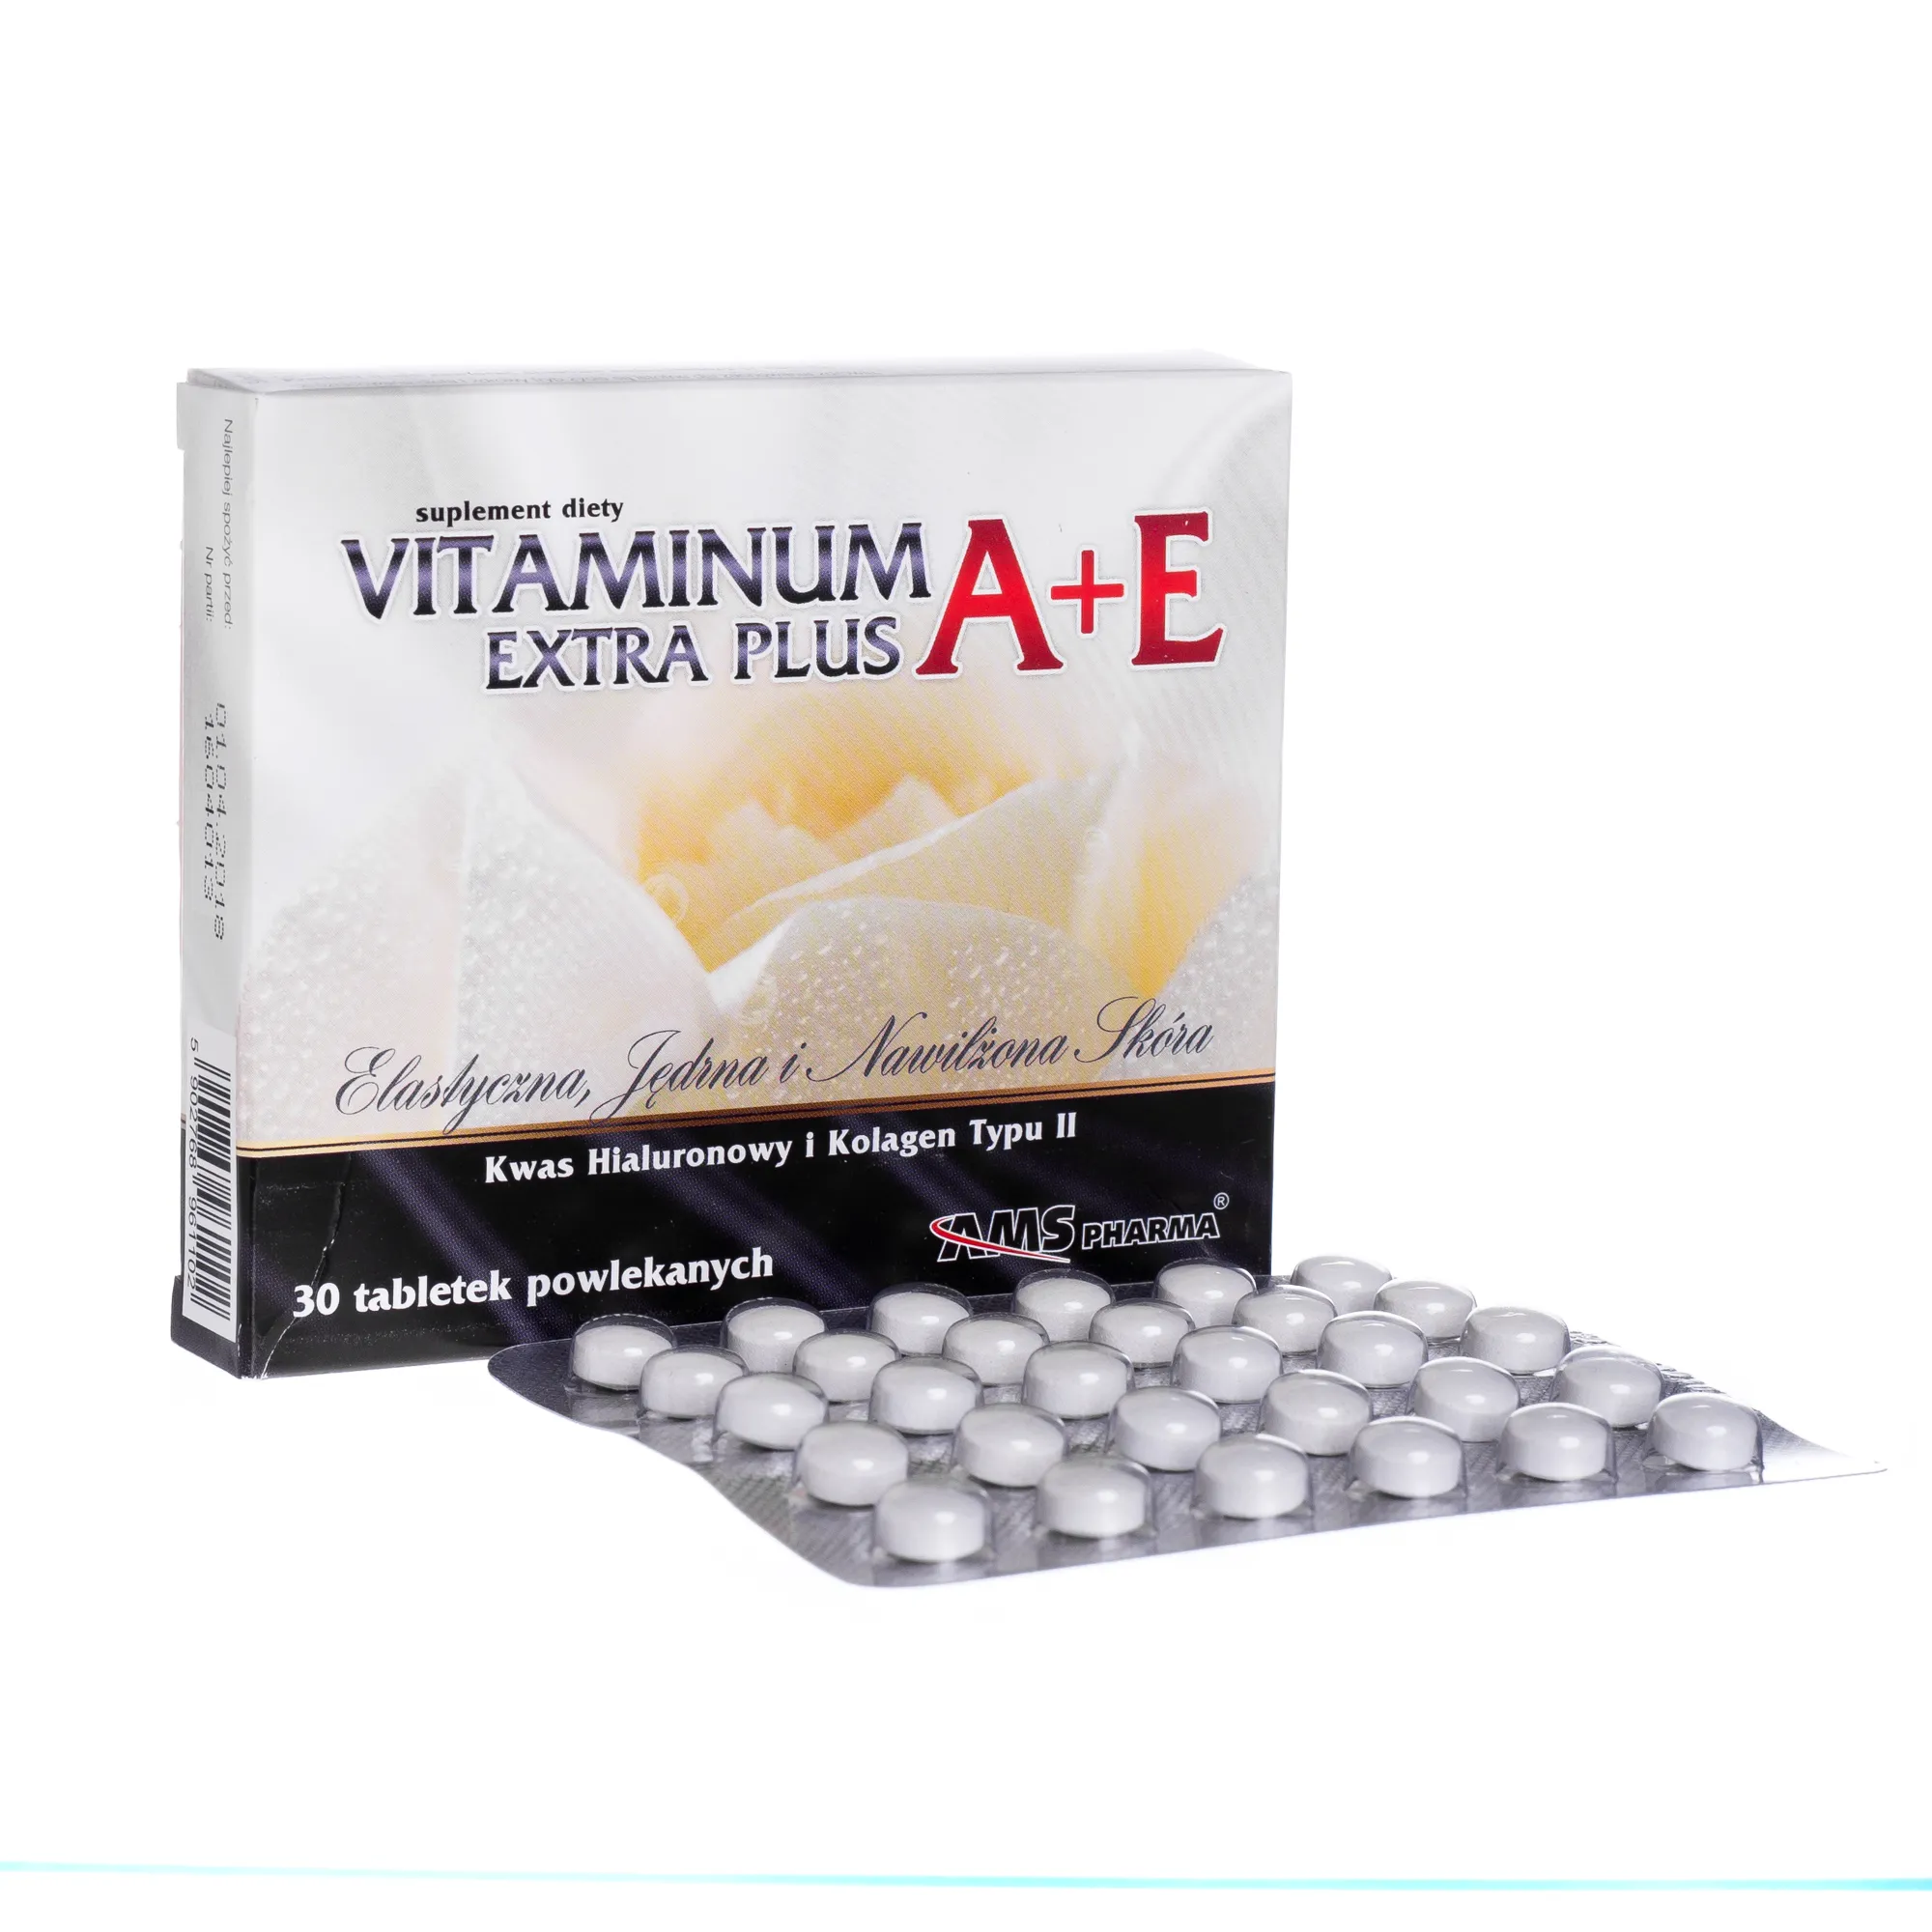 Witaminum A+E Extra Plus, suplement diety, 30 tabletek powlekanych